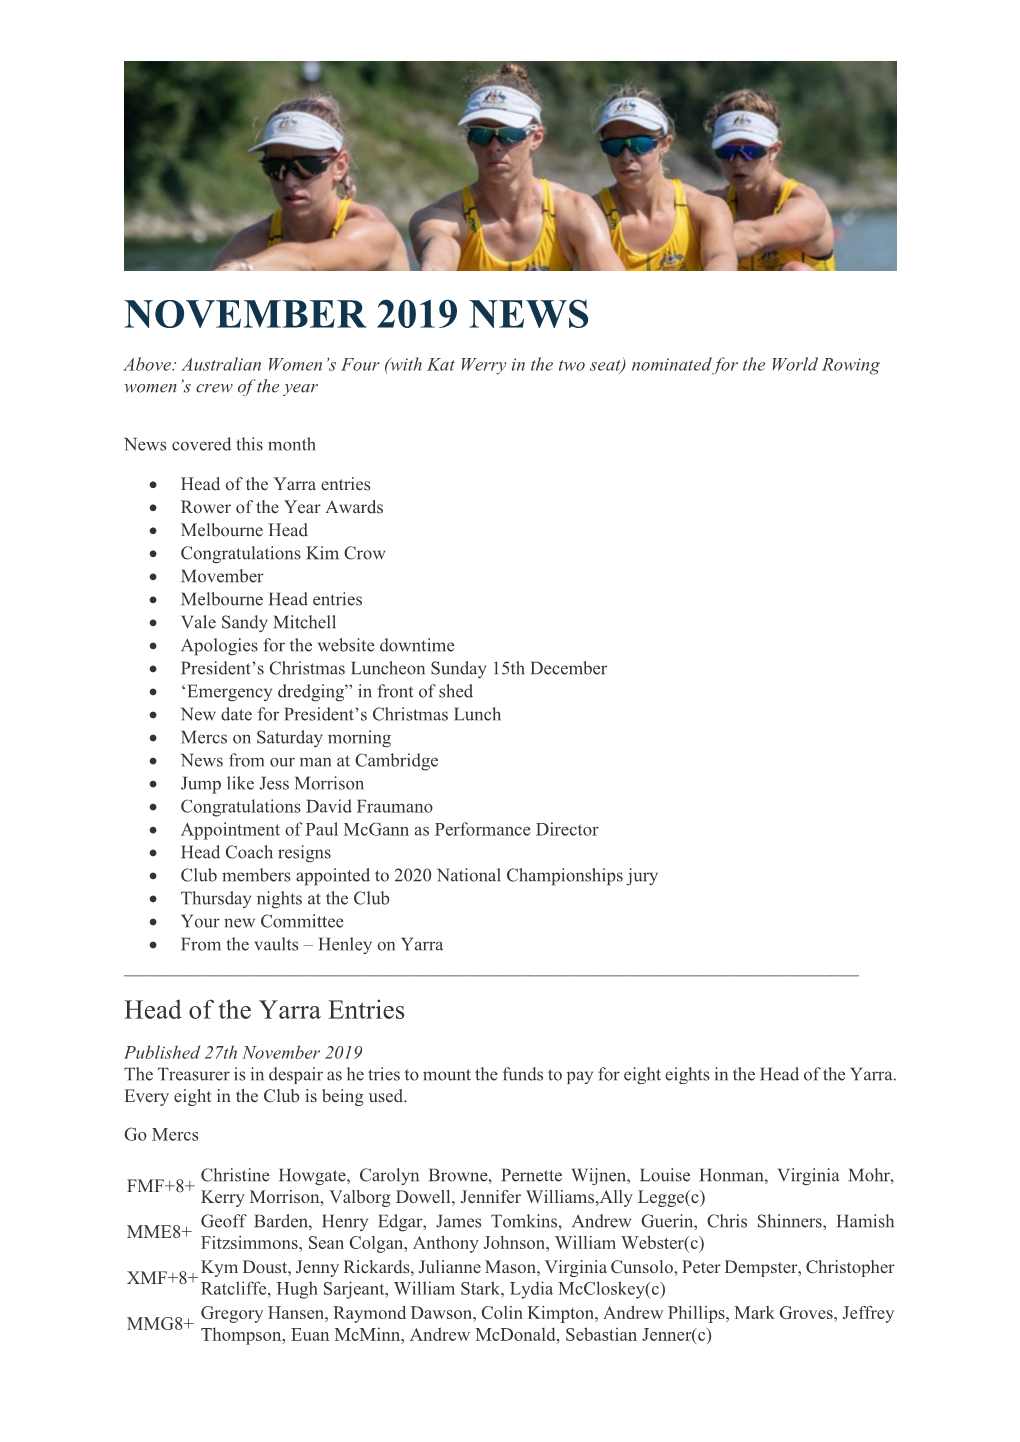 NOVEMBER 2019 NEWS Above: Australian Women’S Four (With Kat Werry in the Two Seat) Nominated for the World Rowing Women’S Crew of the Year